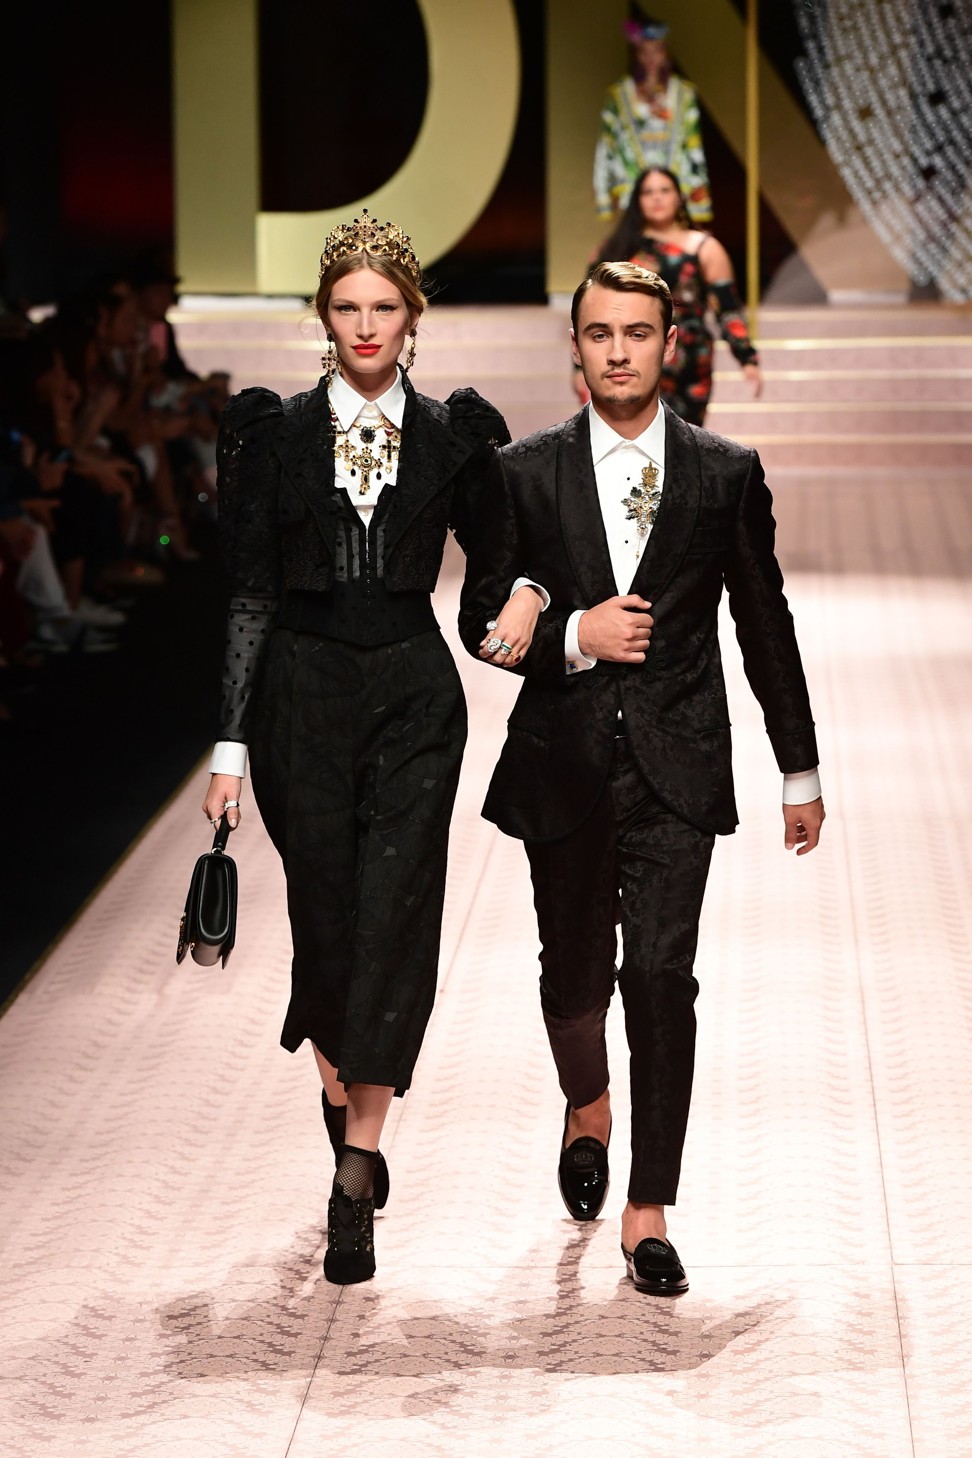 Models Liz Kennedy and Brandon Lee were among those who strode the catwalk. Photo: AFP